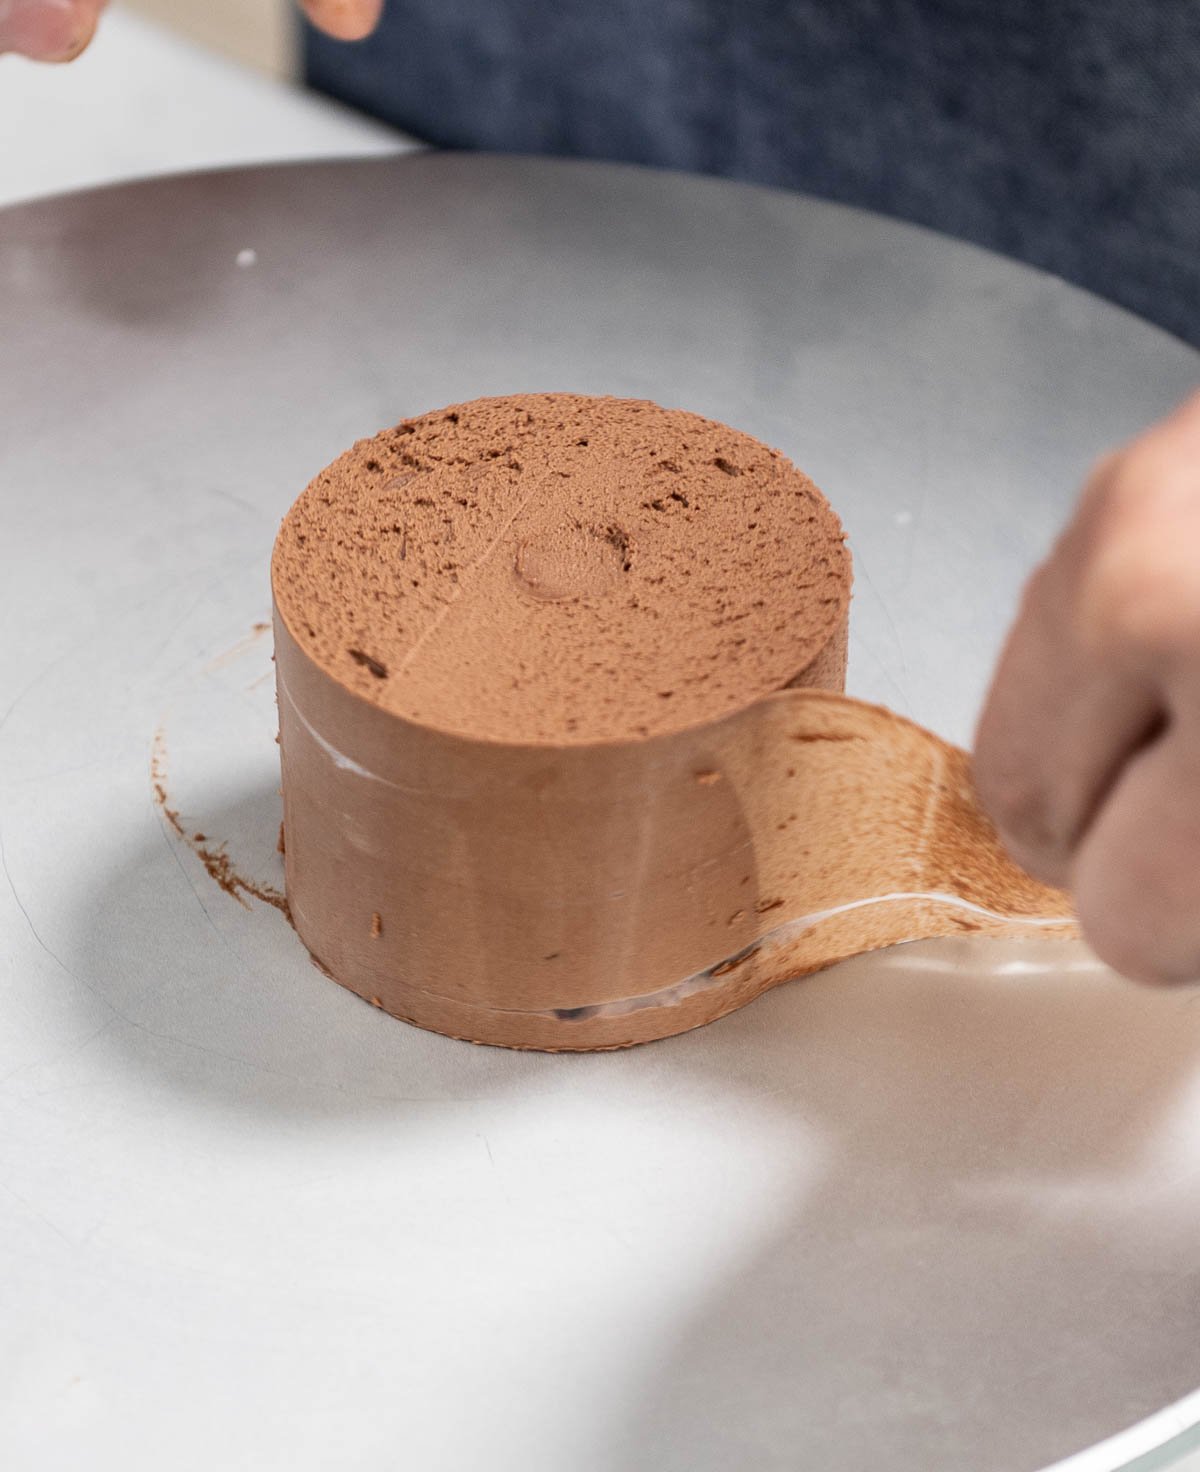 removing acetate from chocolate entremet